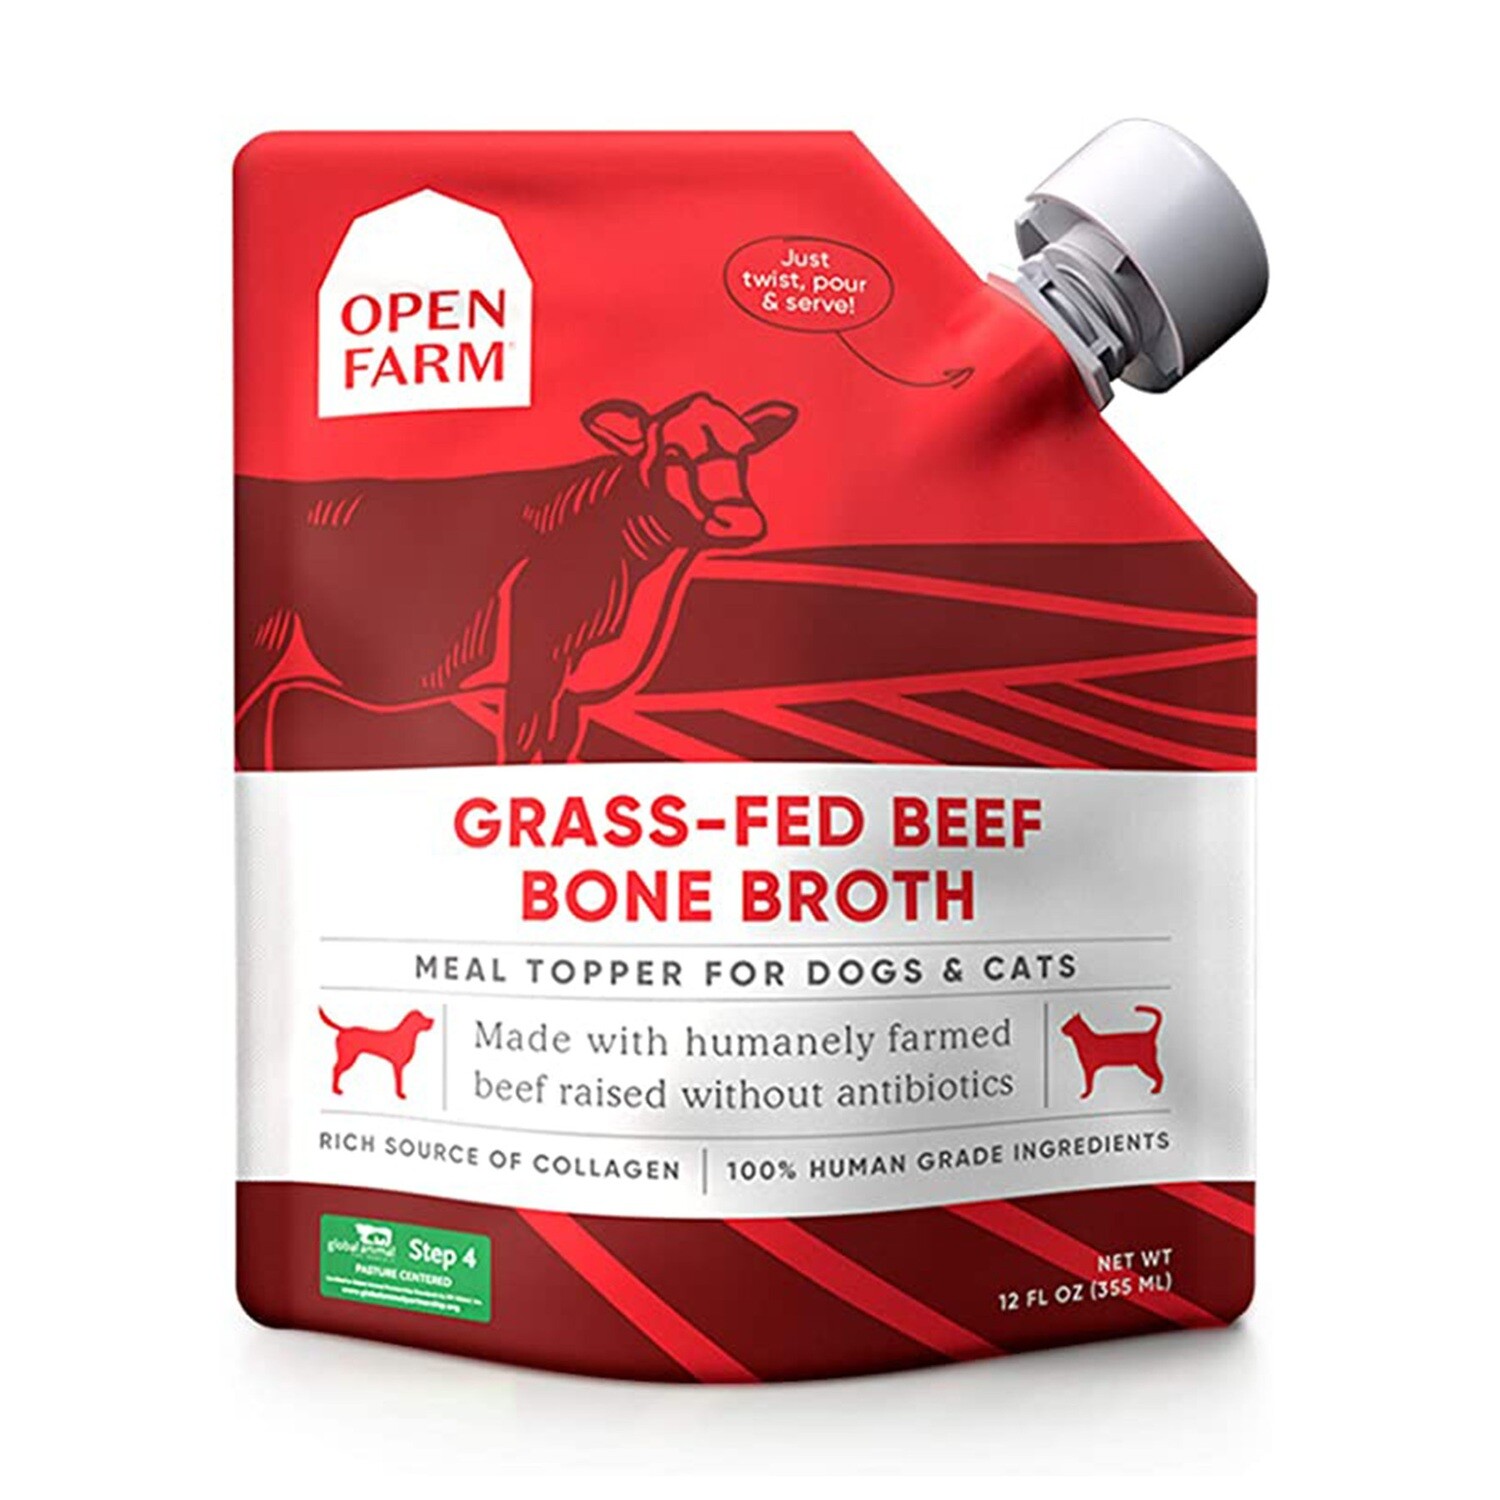 Open Farm Grass-Fed Beef Bone Broth for Dogs and Cats 12oz